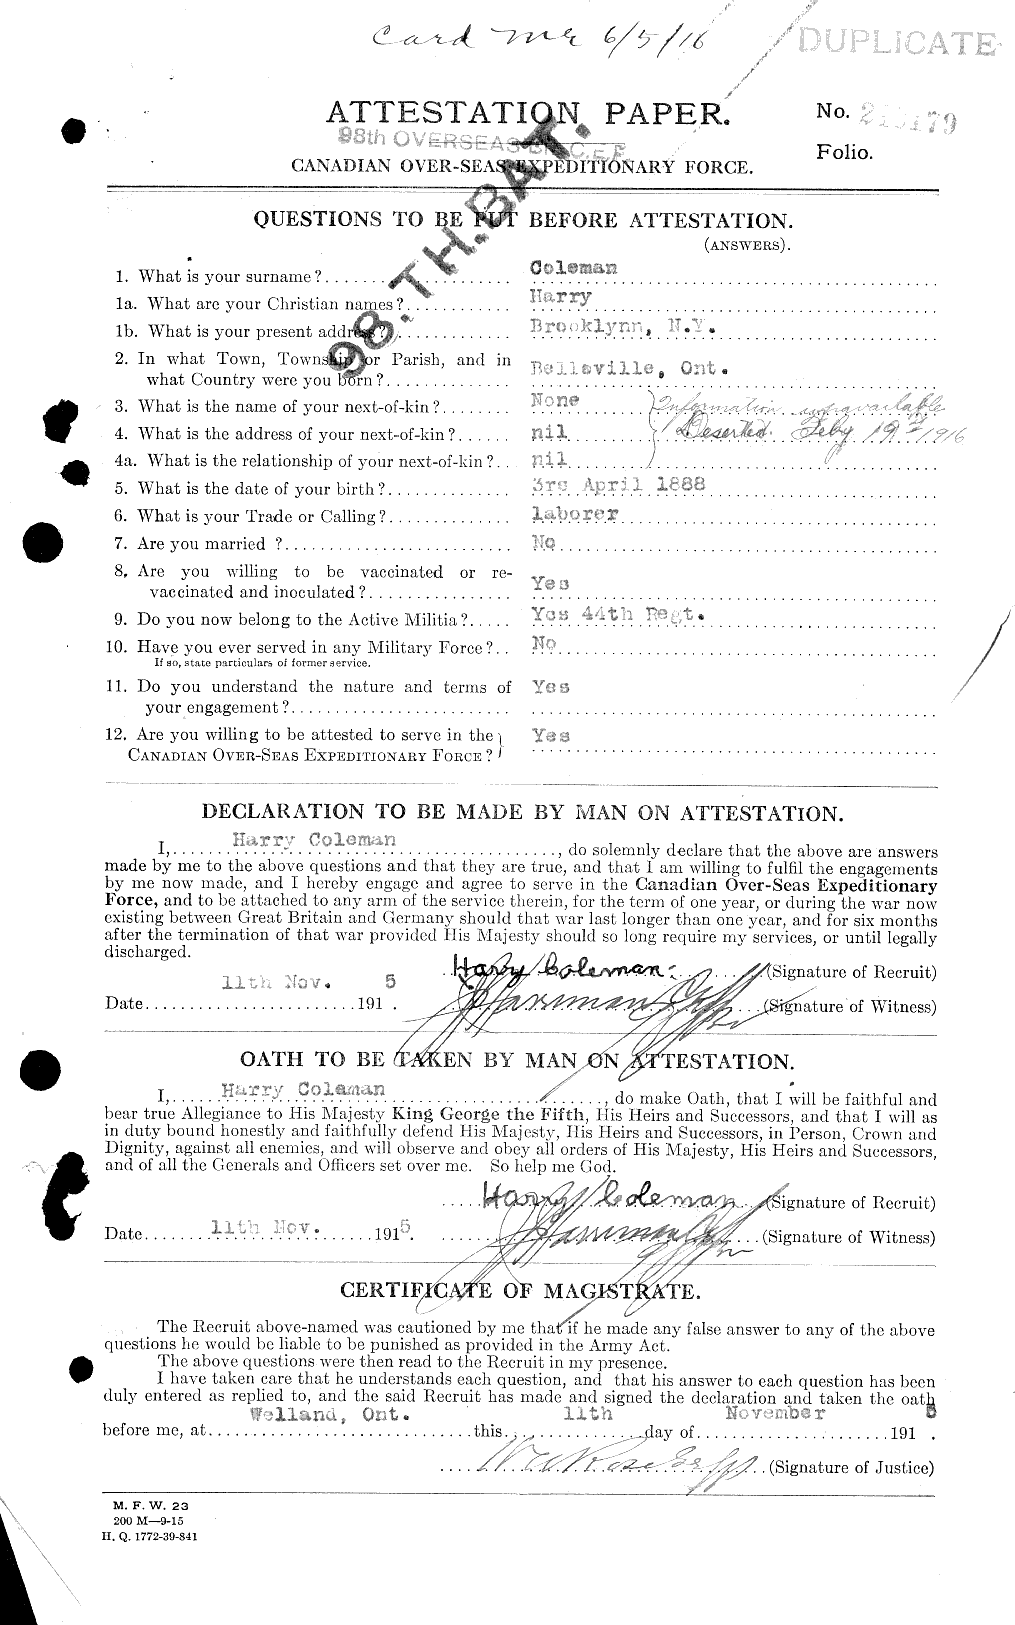 Personnel Records of the First World War - CEF 028163a